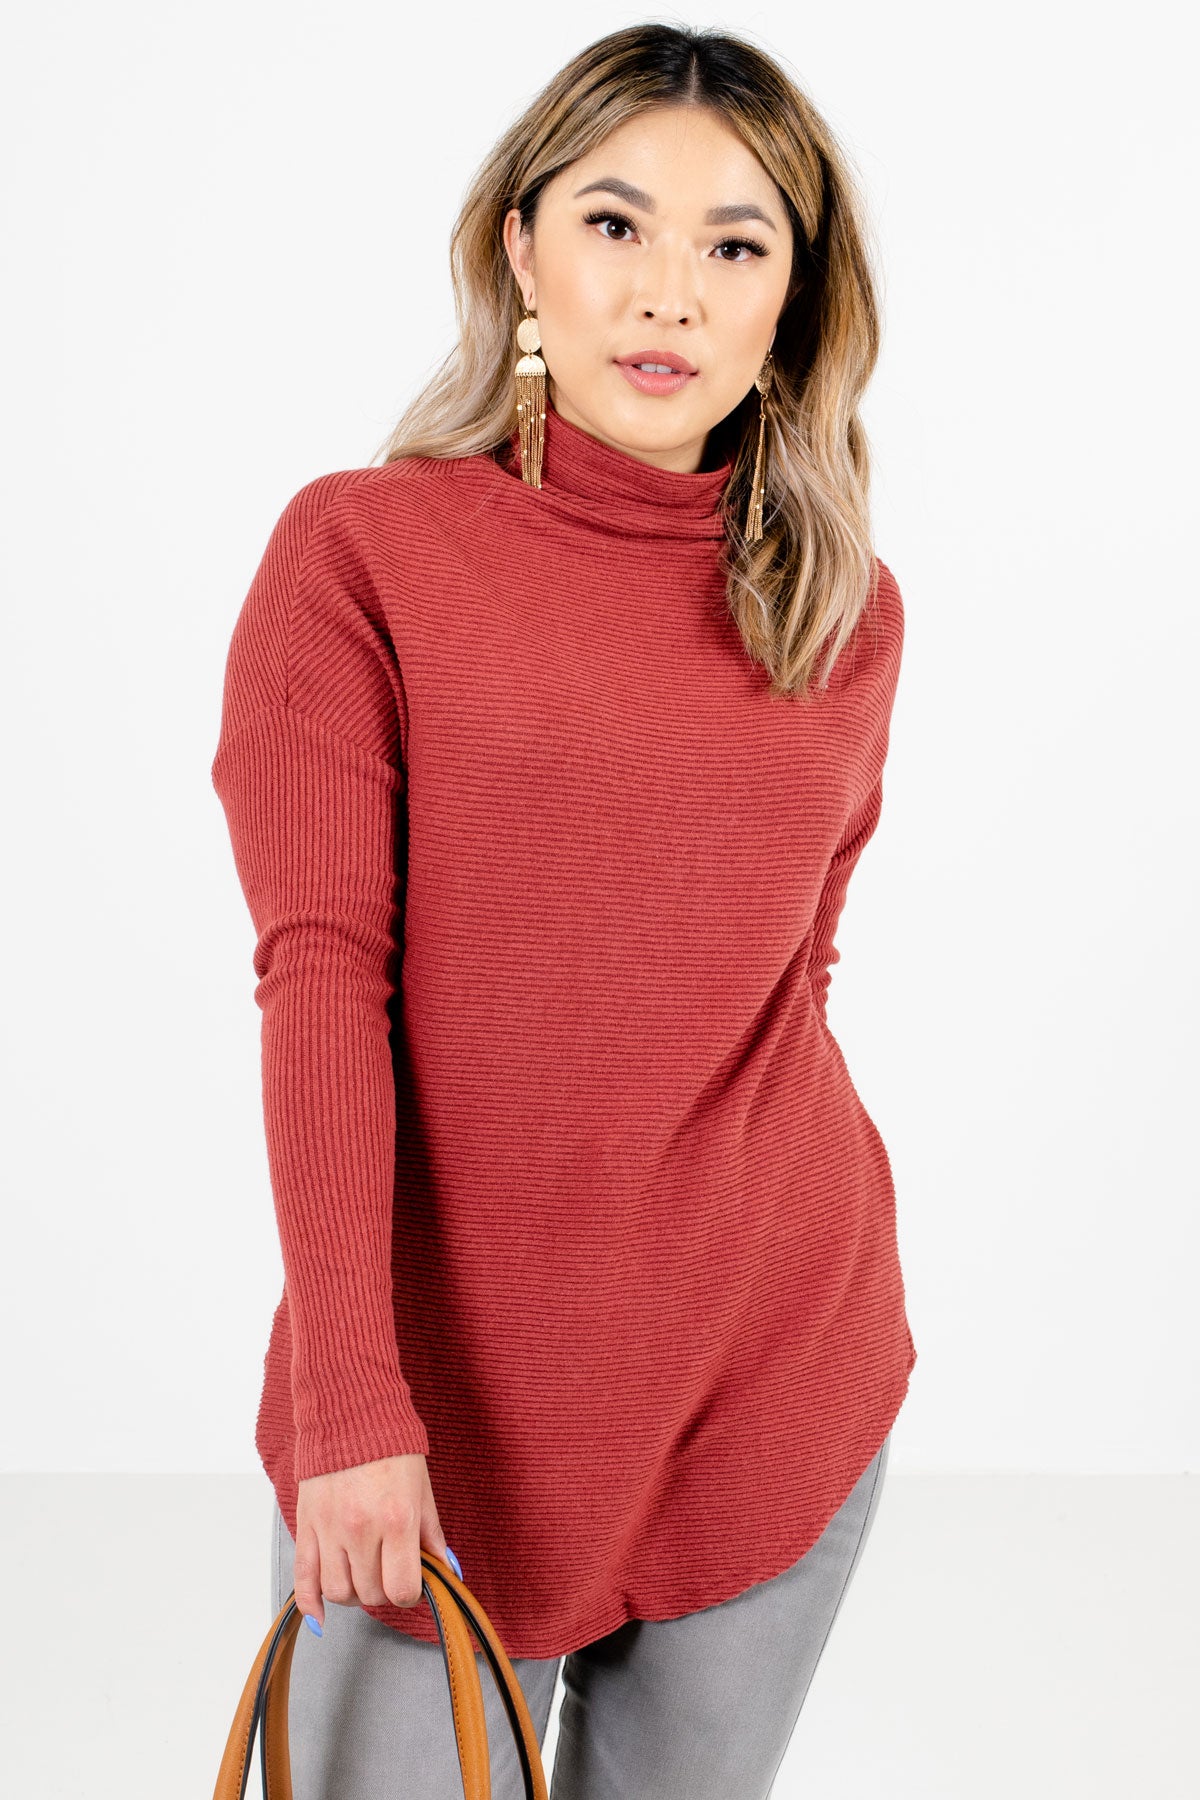 Women’s Brick Red Relaxed Fit Boutique Sweaters